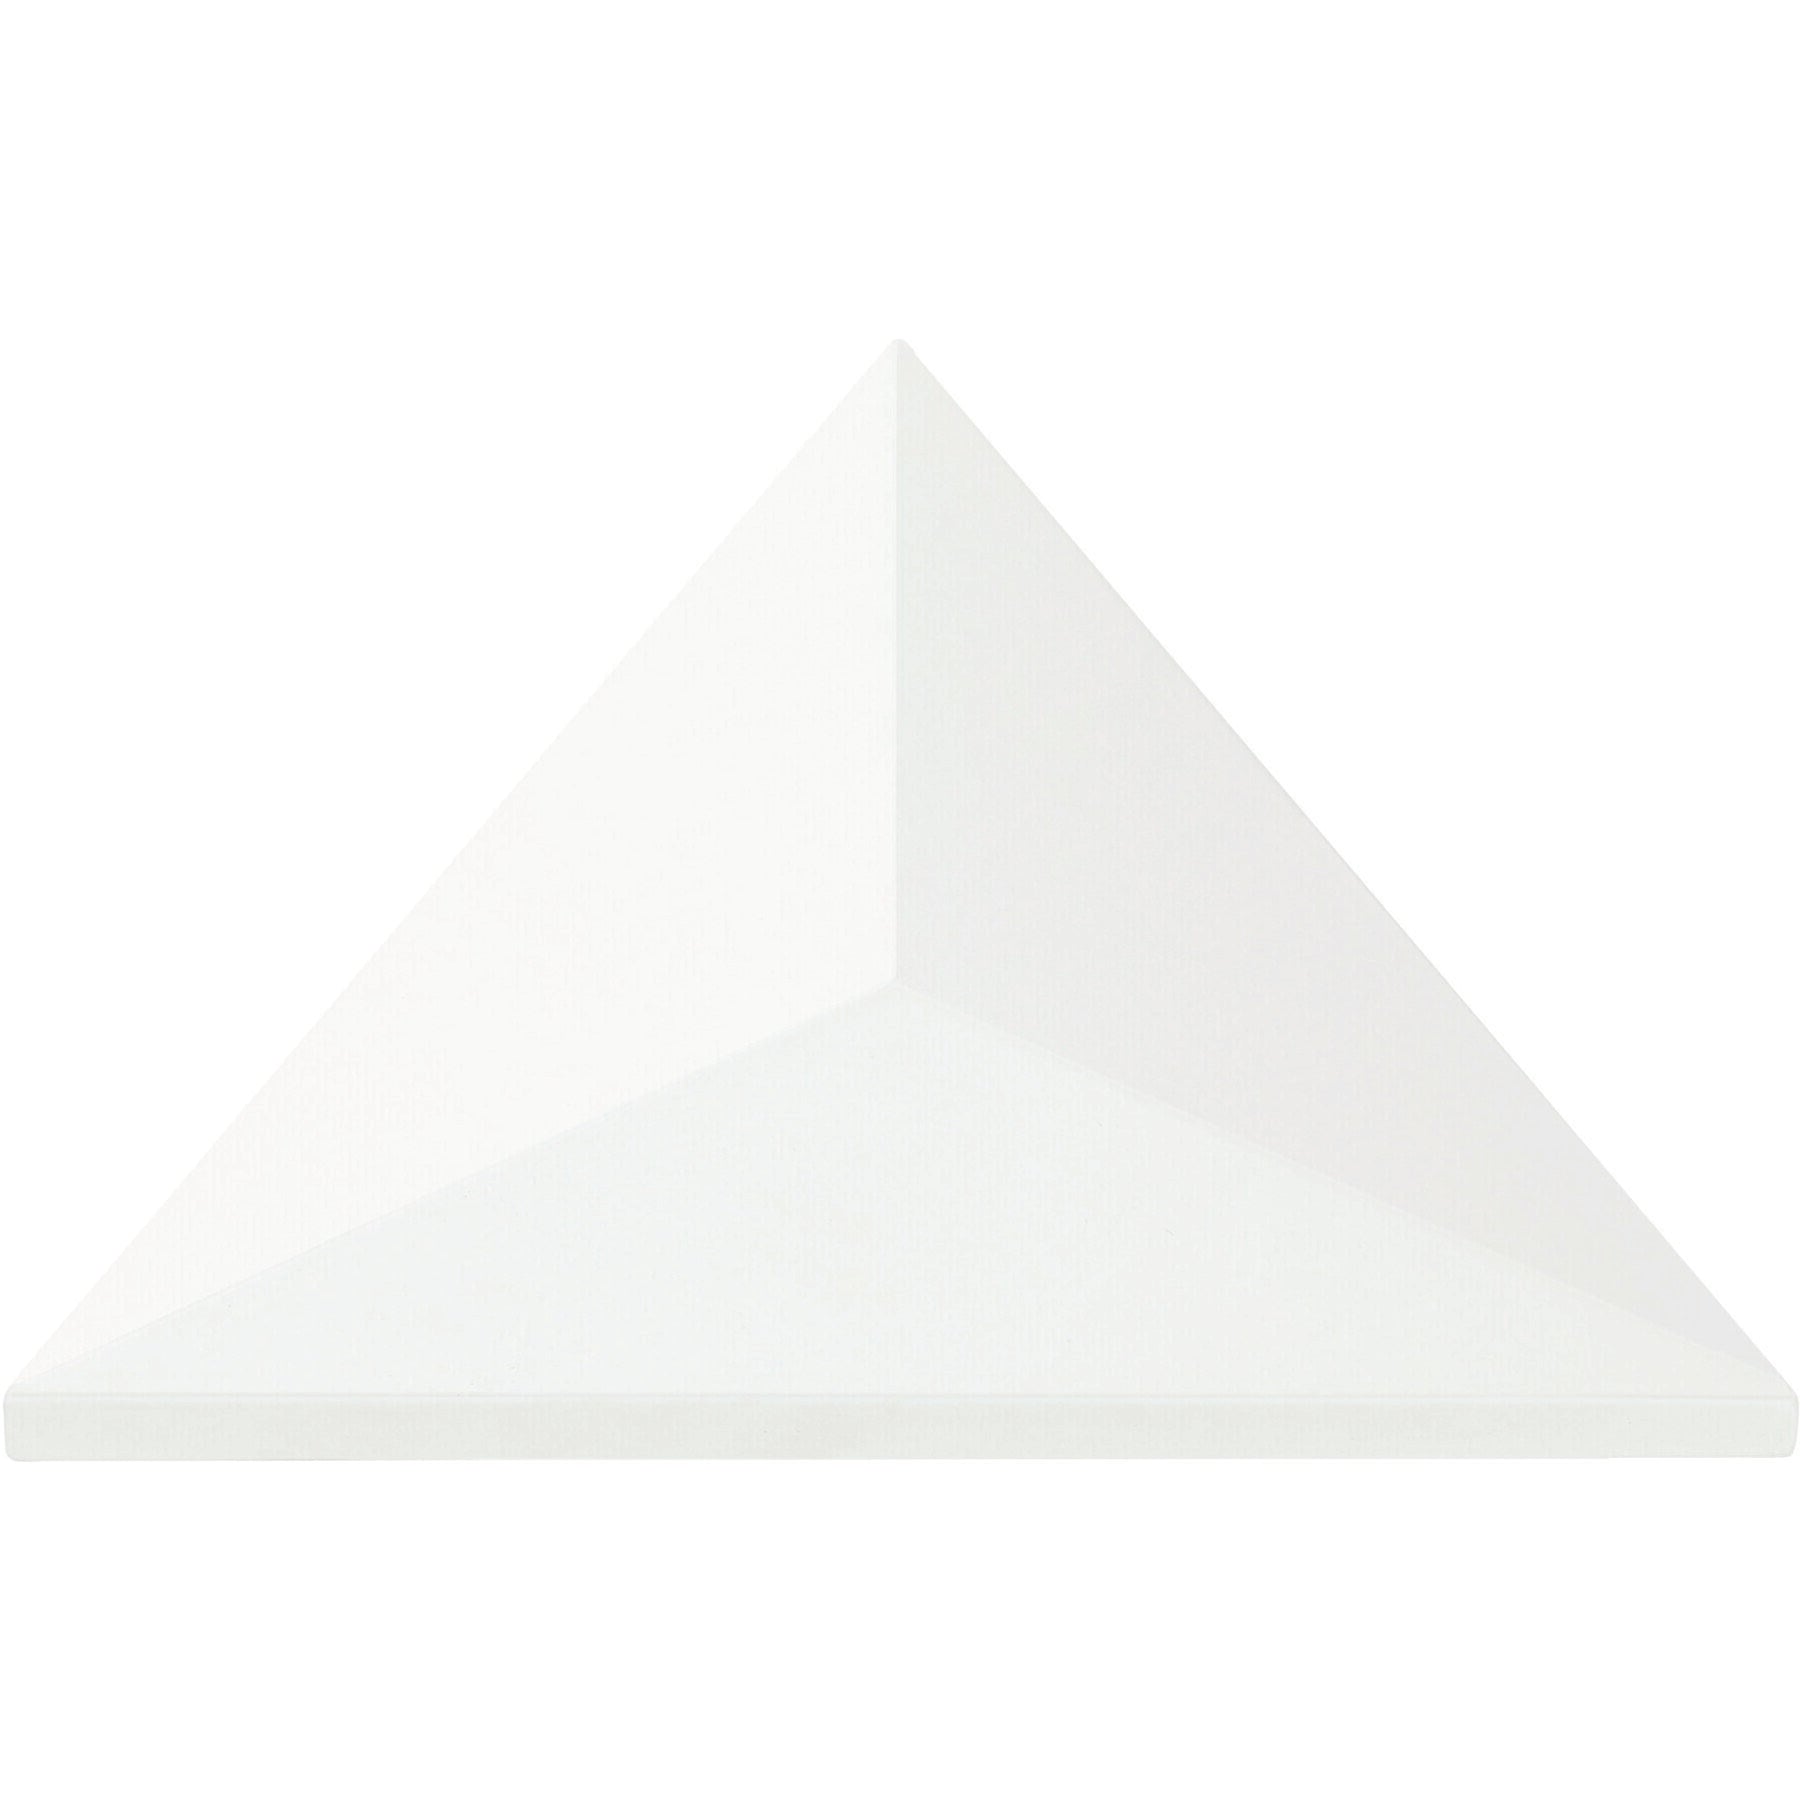 Daltile - STARE™ Collection - Electric 6 in. x 5 in. Tile - Triangle Peak Joule White